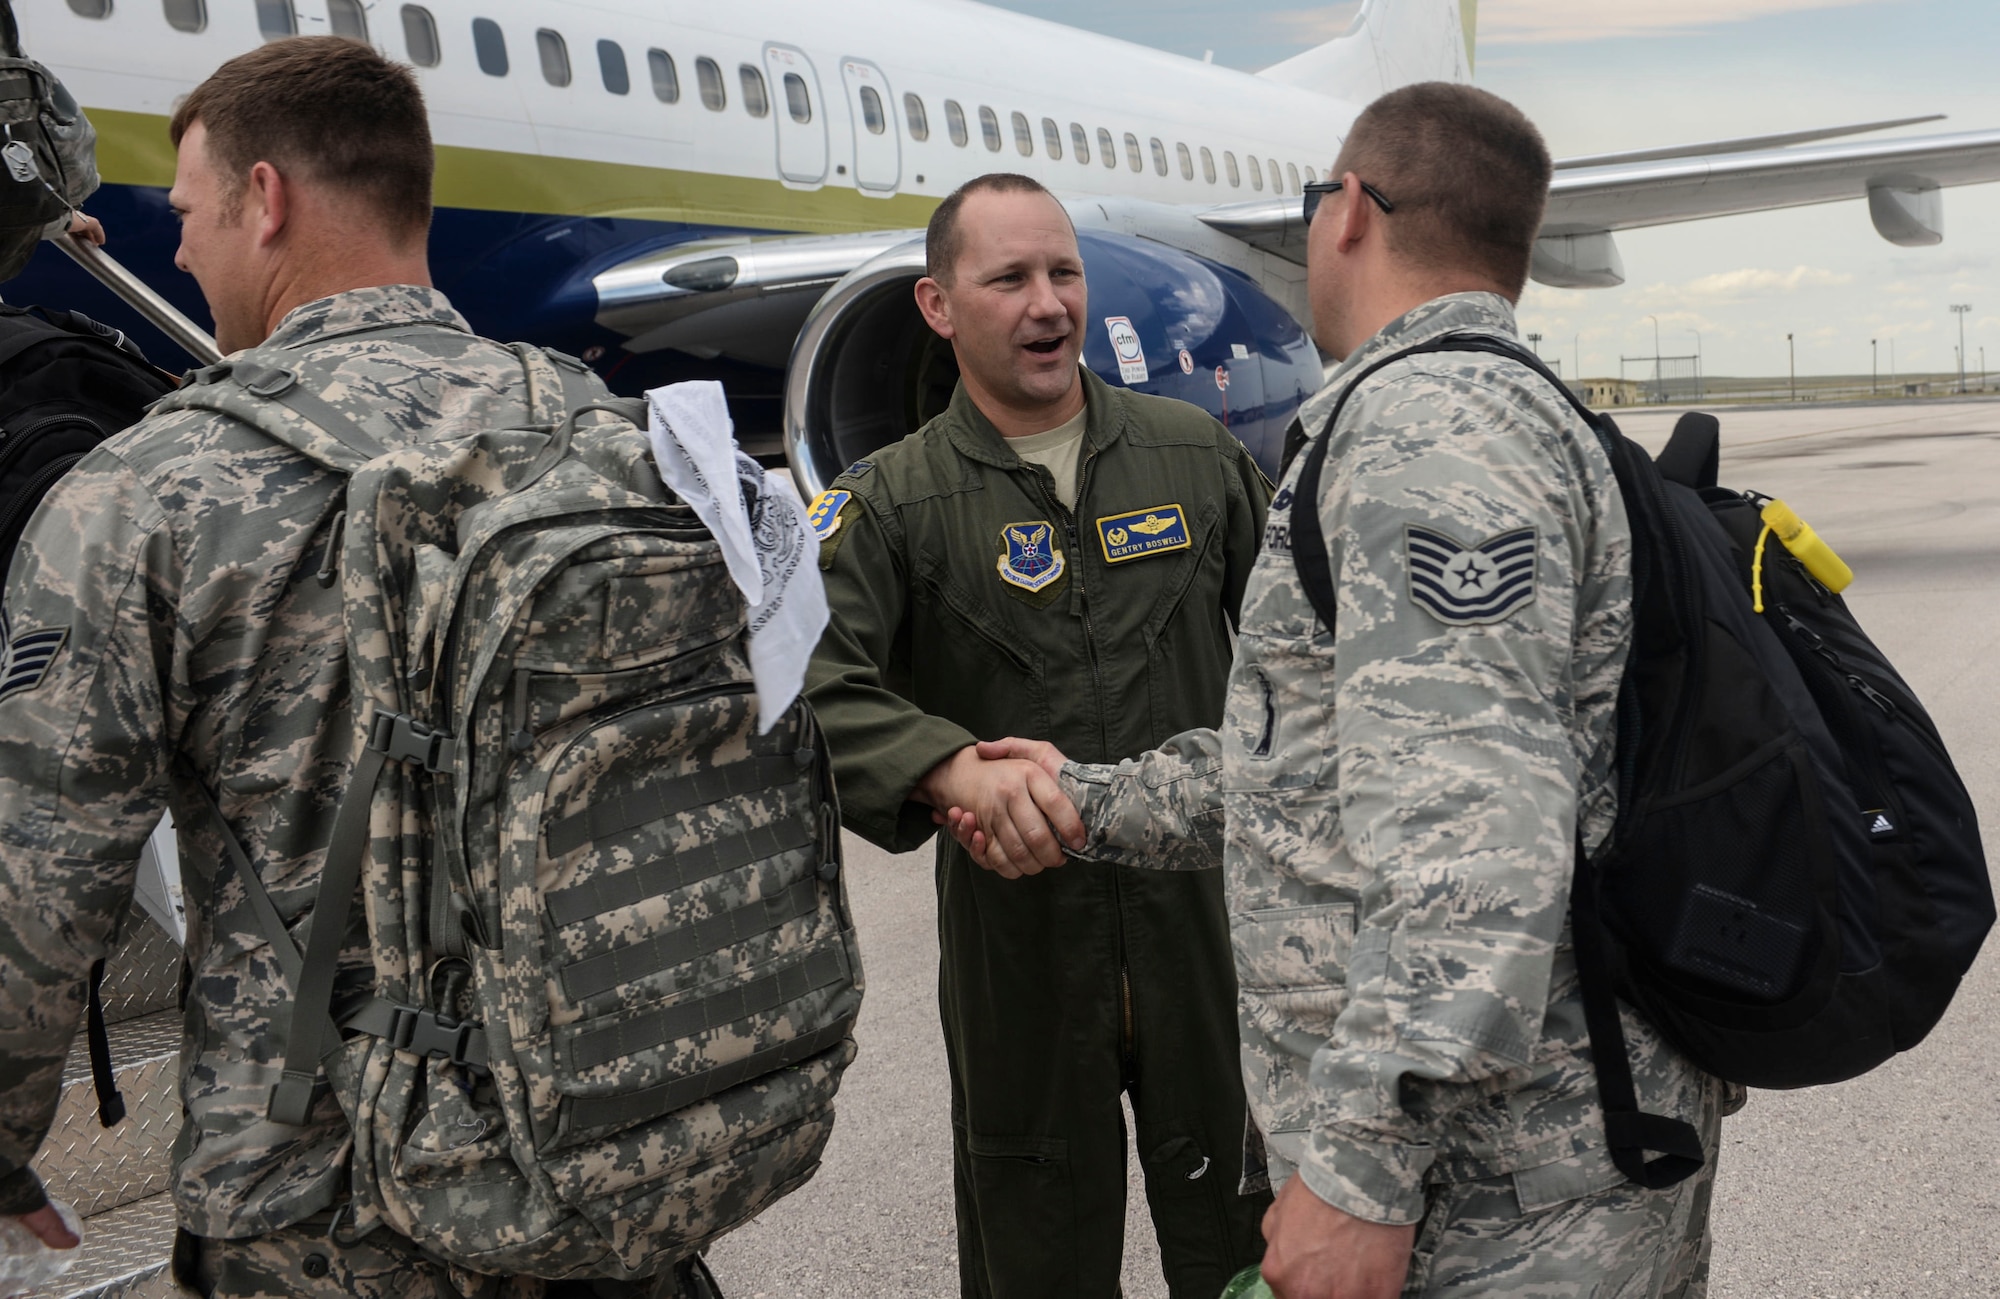 Col. Gentry Boswell, commander of the 28th Bomb Wing, shakes hands with an Airman before they leave for a deployment to Andersen Air Force Base (AFB), Guam, from Ellsworth AFB, S.D., Aug. 1, 2016. While boarding the aircraft, Boswell and other base leaders bid Airmen farewell. (U.S. Air Force photo by Airman 1st Class Sadie Colbert)